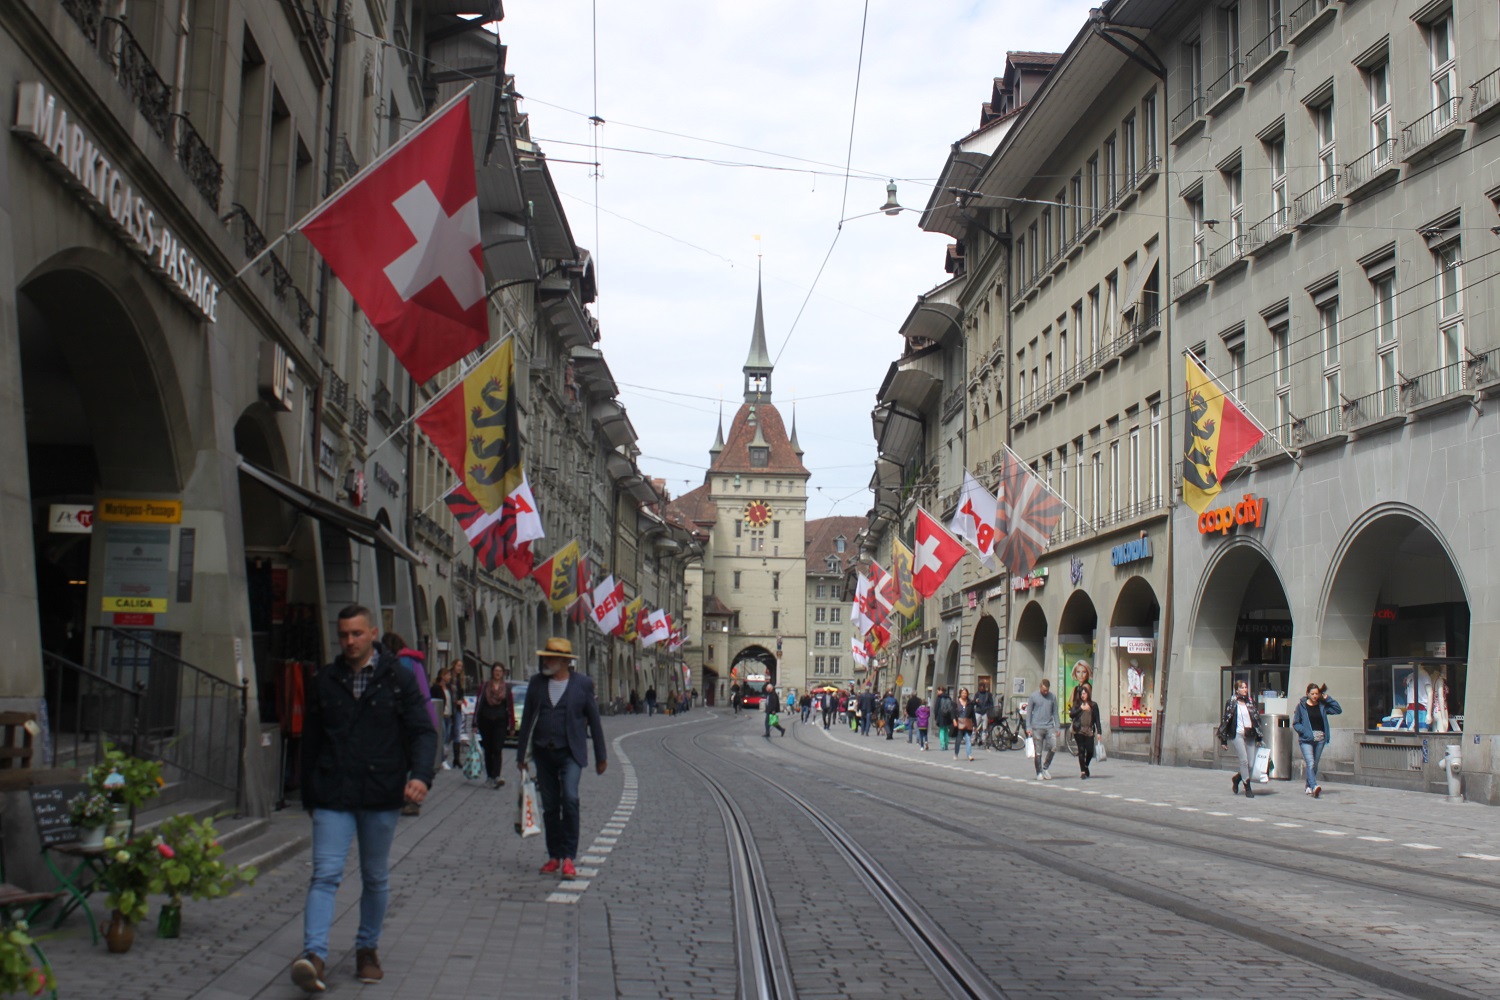 The streets of Bern